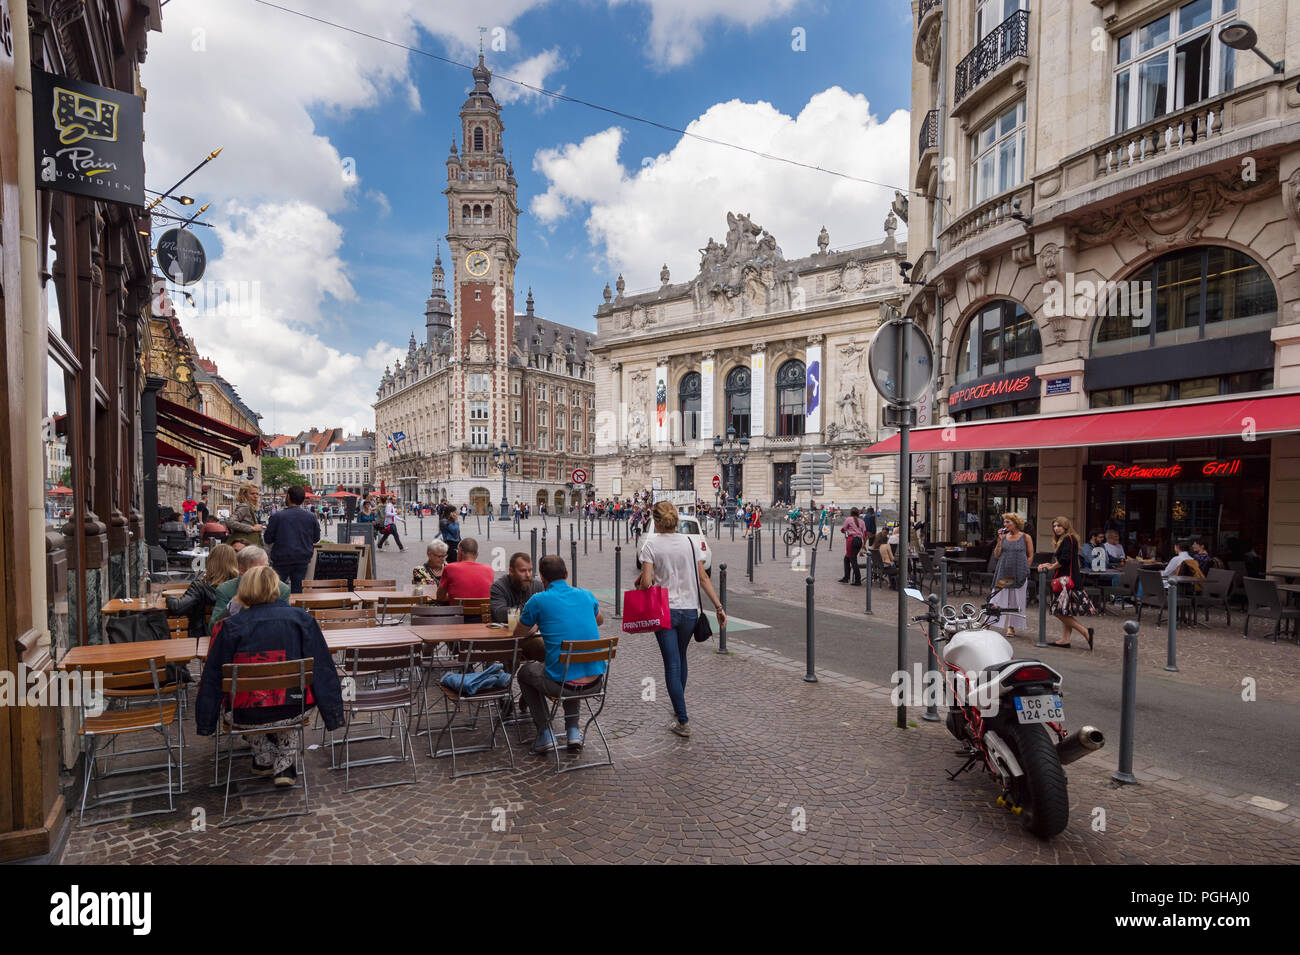 Lille, France - 15 June 2018: People walking On Pierre Mauroy street. Belfry of the Chambre de Commerce in the background. Stock Photo